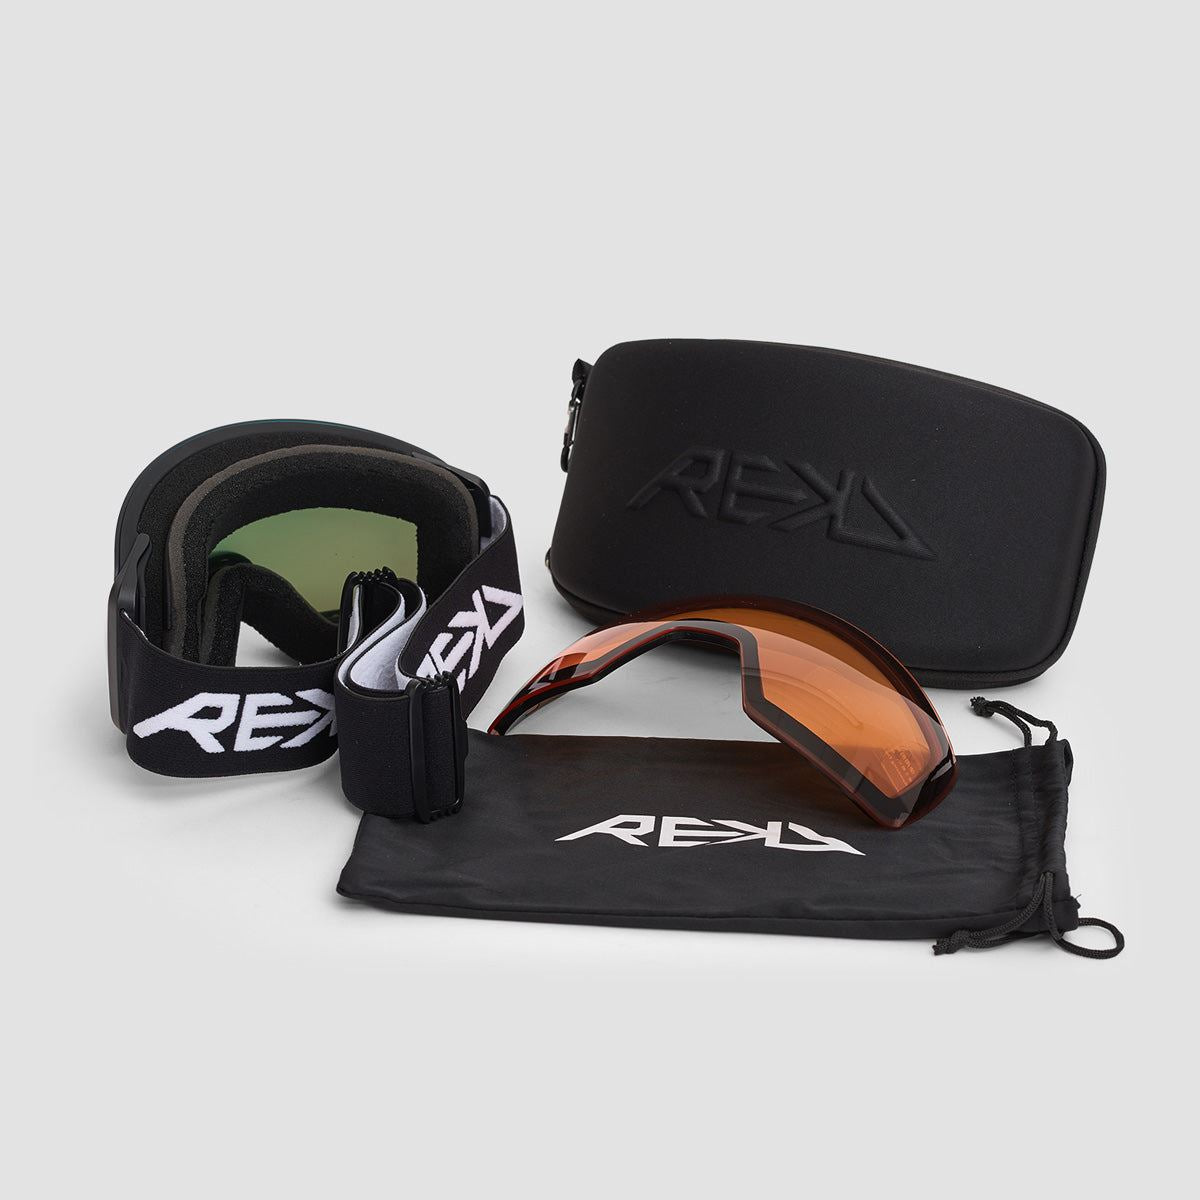 REKD Ascent MagSphere Snow Goggle Kit Black/Torch